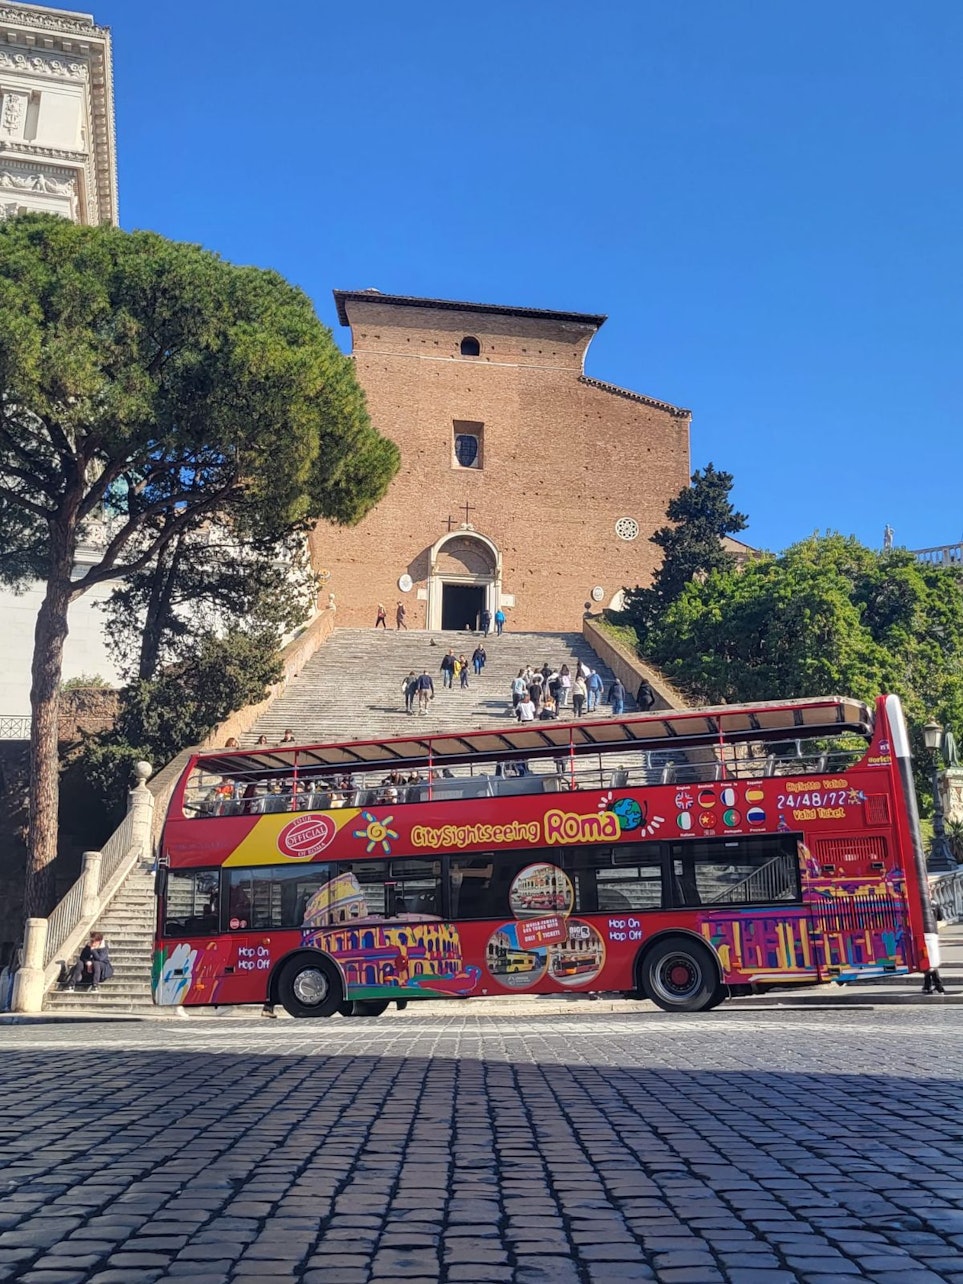 City Sightseeing Rome: Hop-on Hop-off Open Bus Tour - Accommodations in Rome